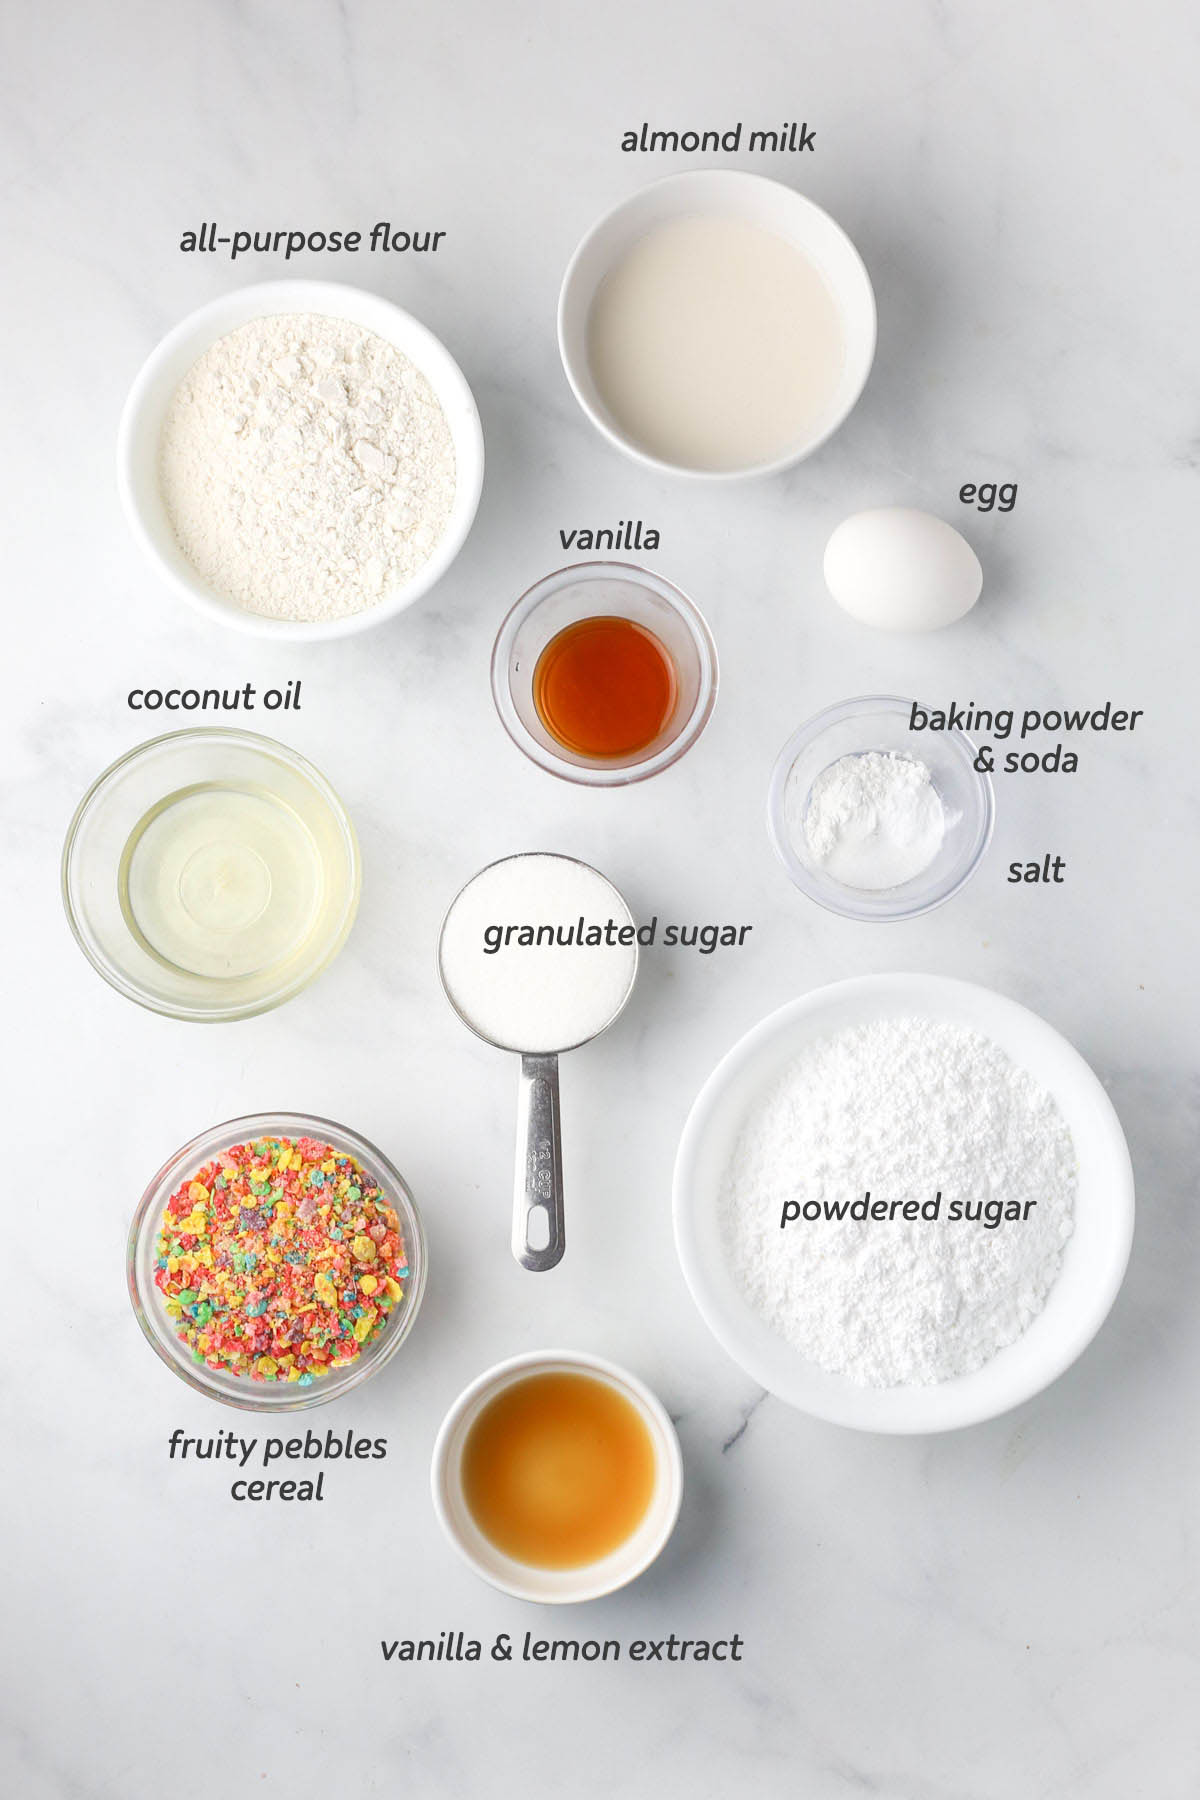 all ingredients to make the donuts shown from above, all prepared in small bowls.